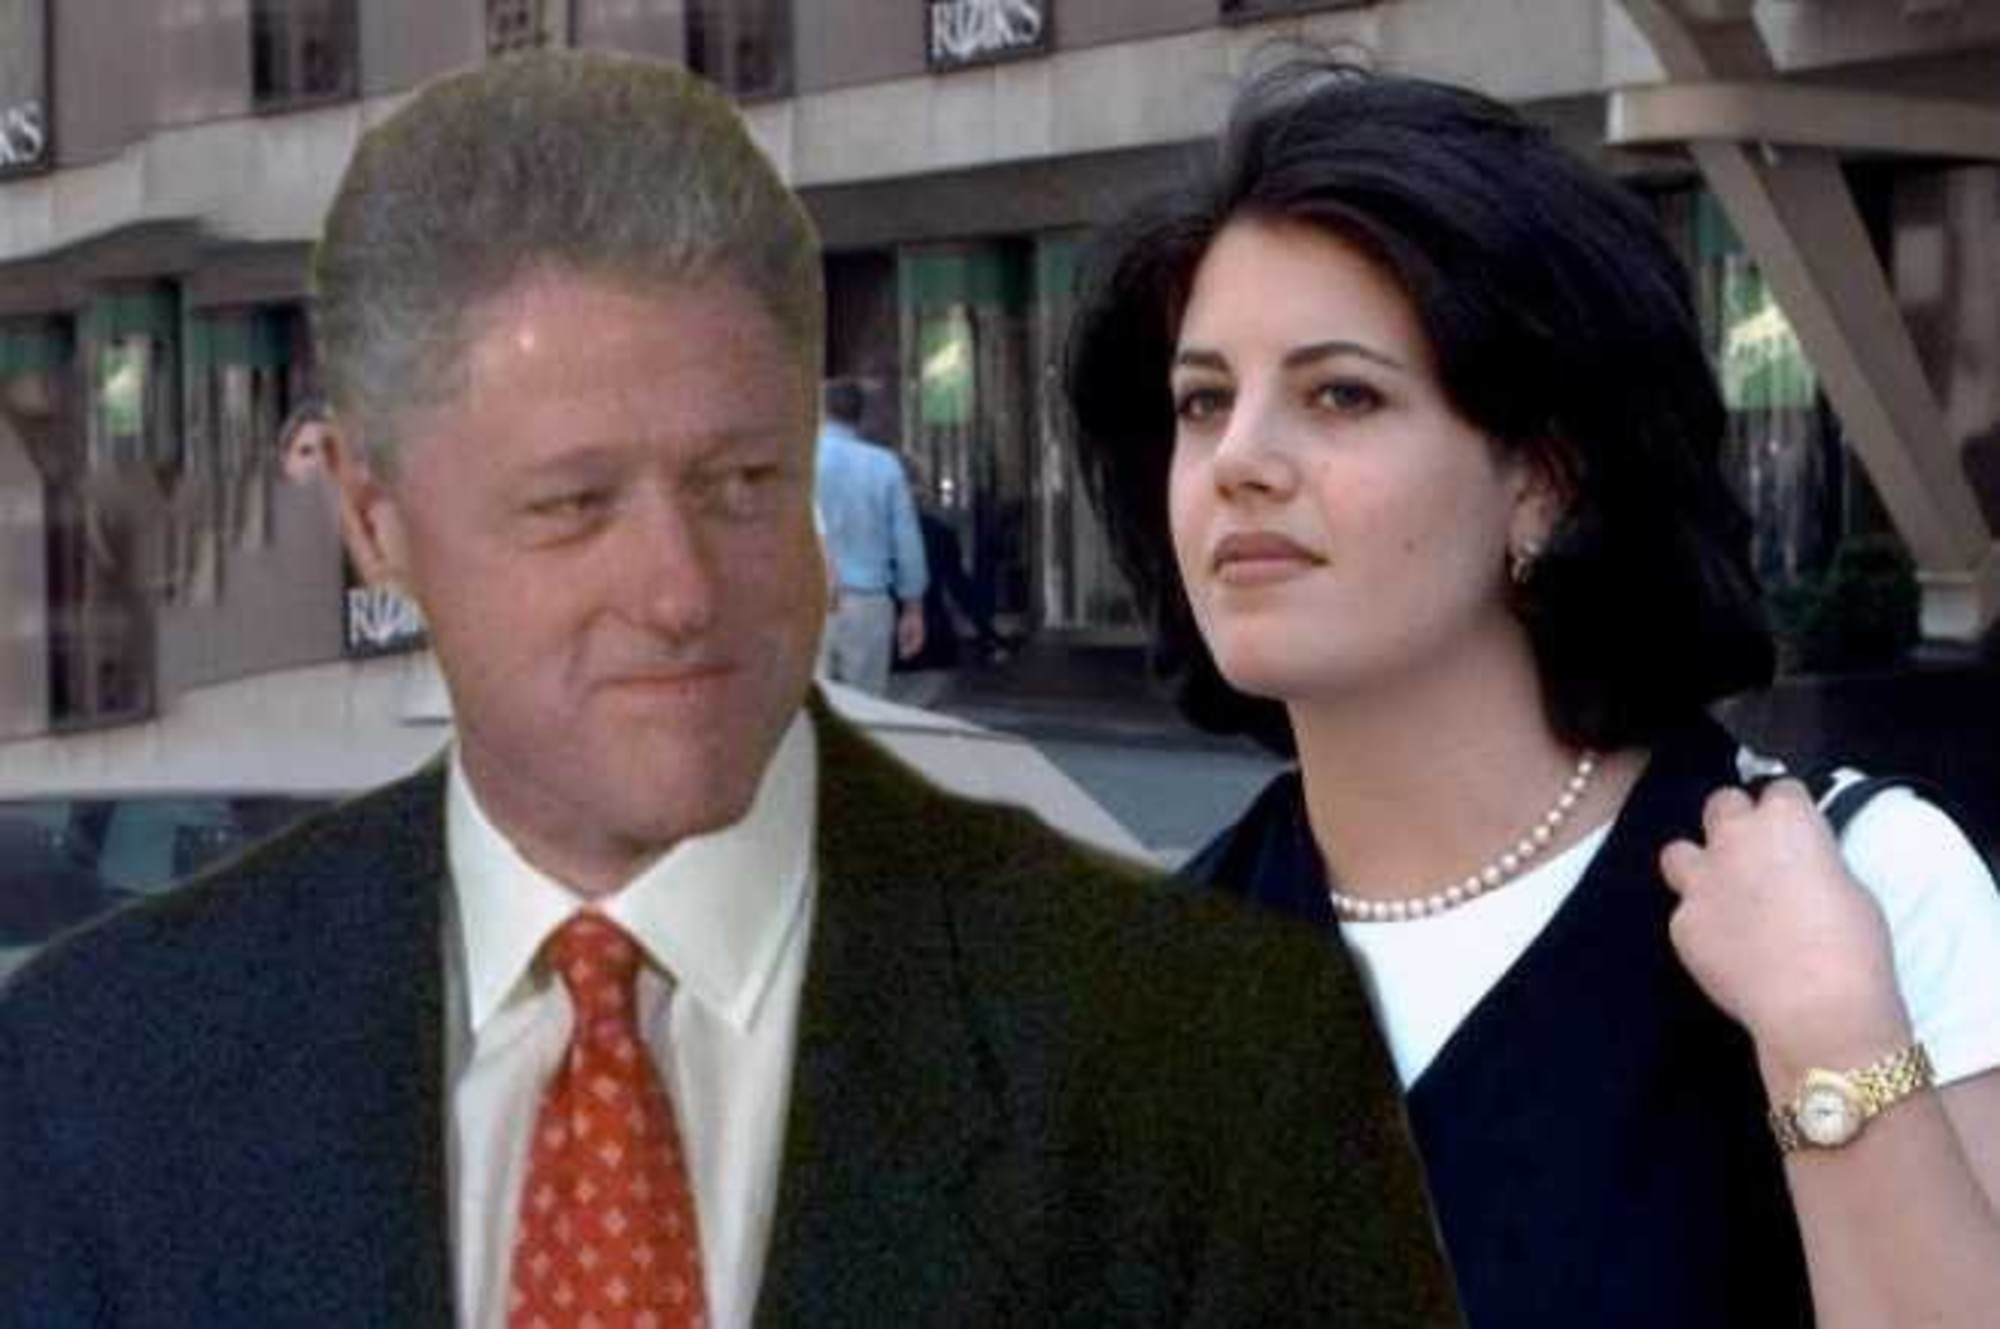 MONICA LEWINSKY Tweets Out on Anniversary of Clinton Affair Scandal: "...